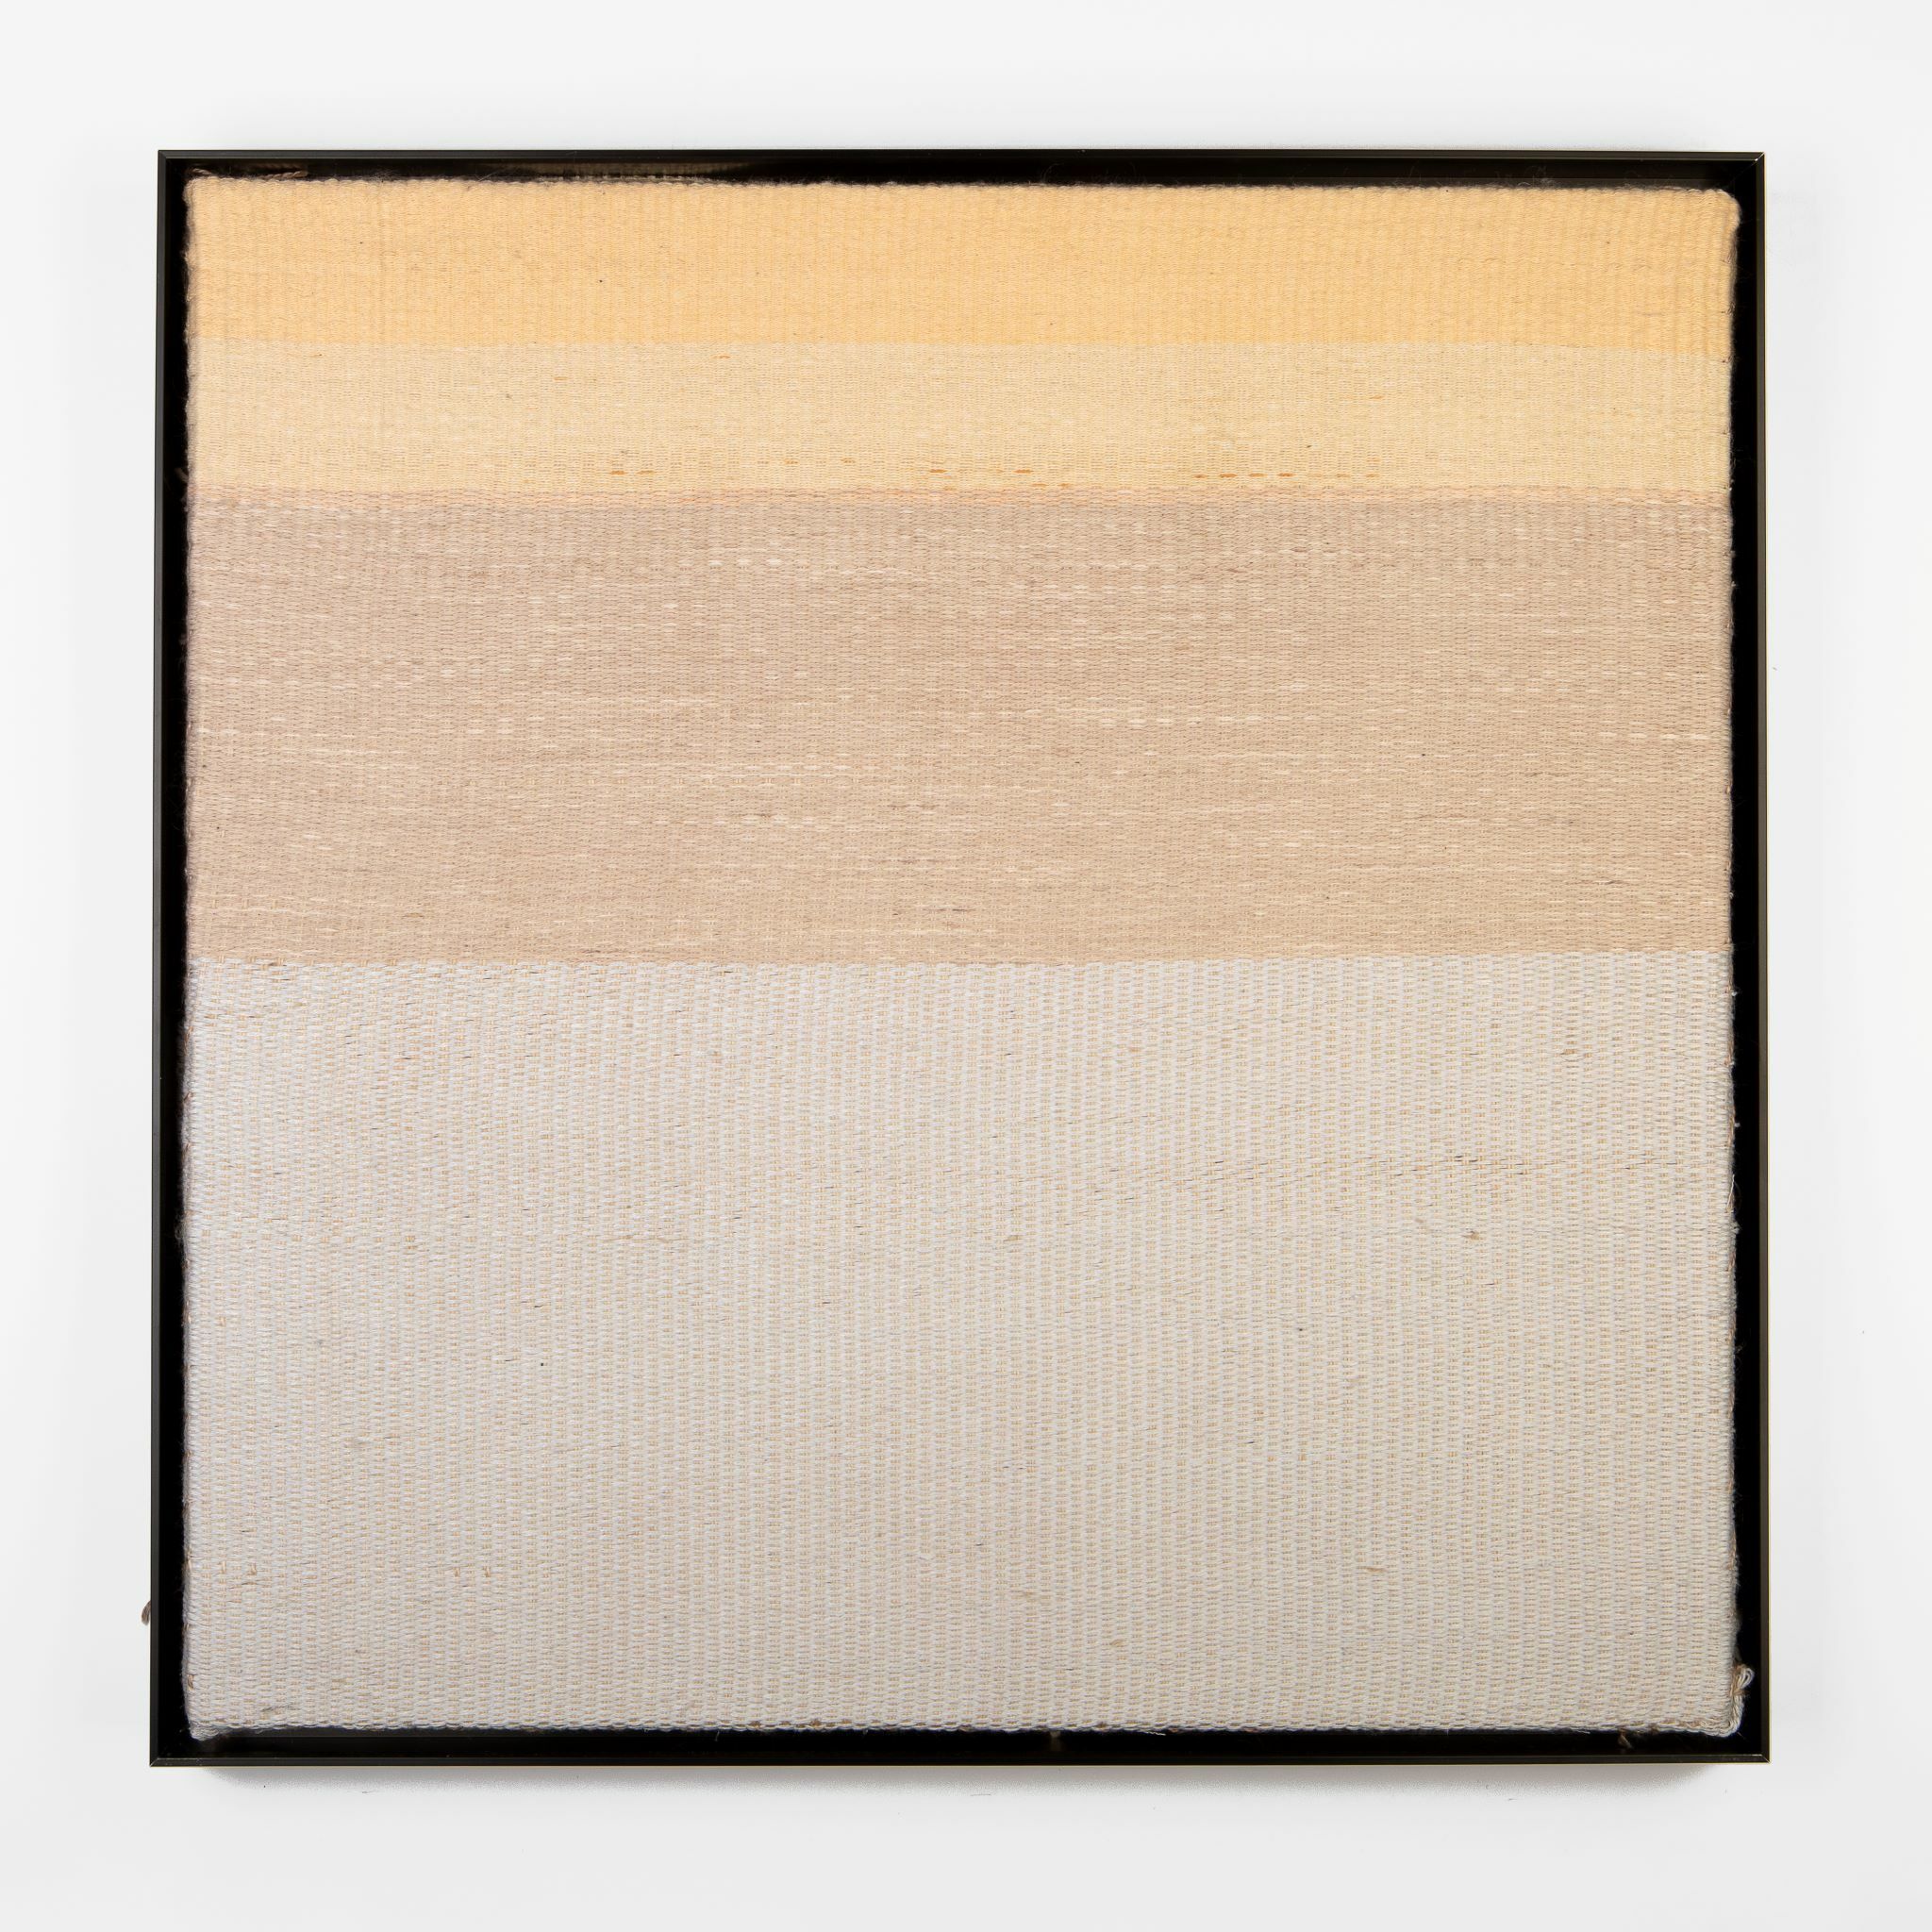 

											Will Clift and Elizabeth Hohimer</b>

											<em>
												Desert Variations</em> 

											<h4>
												Santa Fe: May 28 - July 30, 2022											</h4>

		                																																<i>Andante Music,</i>  
																																								2022, 
																																								Texas Cotton and Clay, 
																																								21 x 21 x 2 inches 
																								
		                				